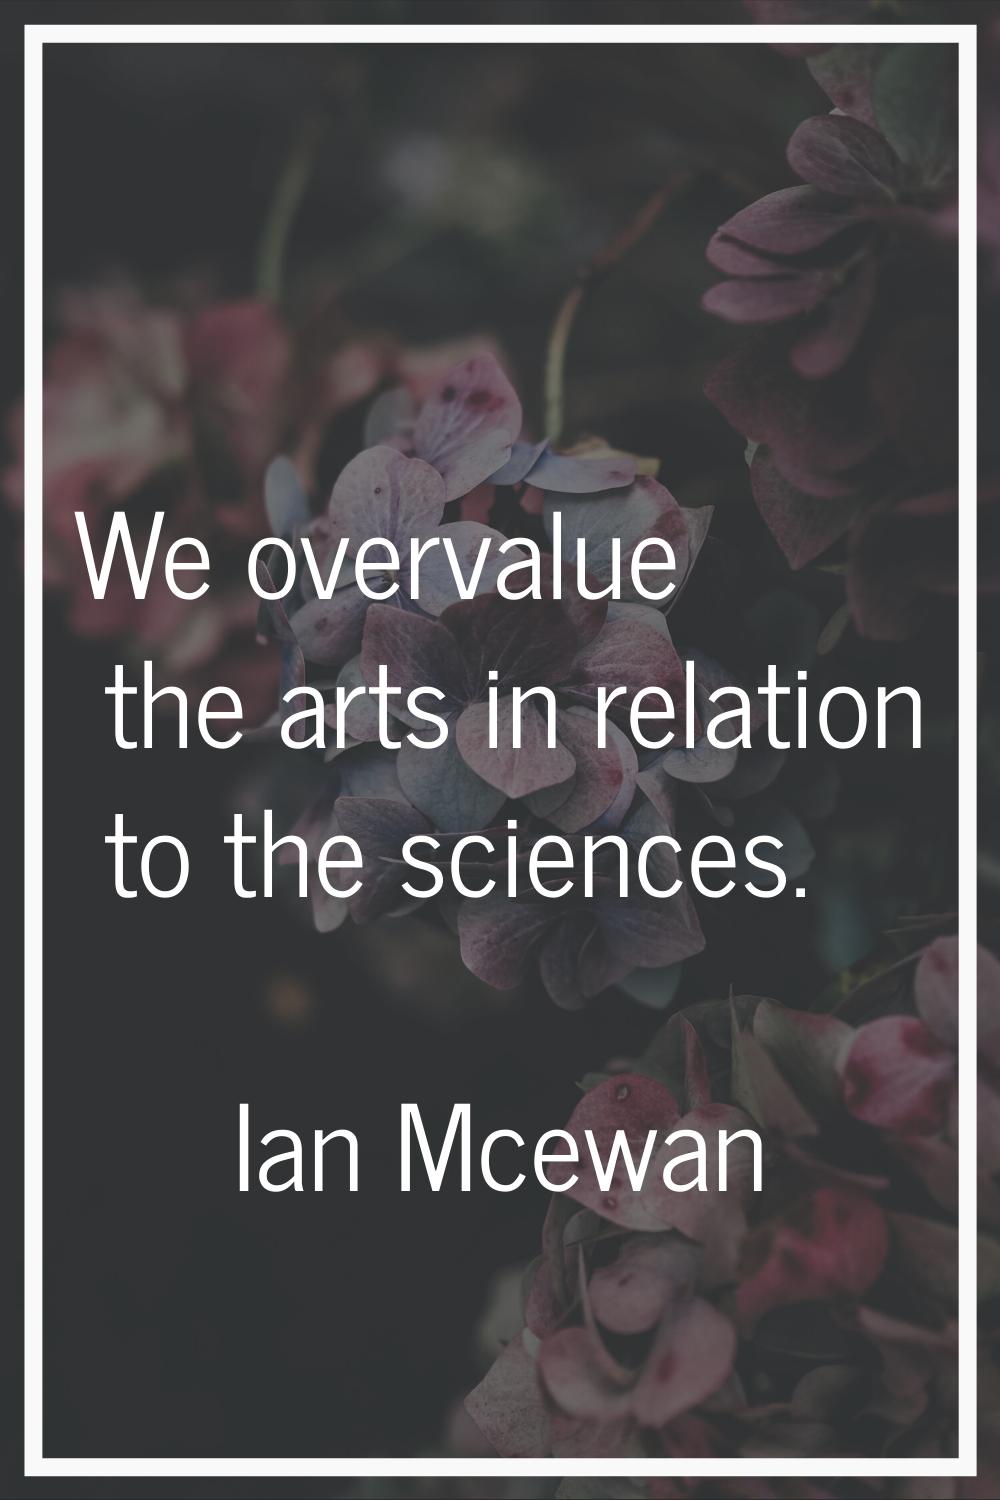 We overvalue the arts in relation to the sciences.